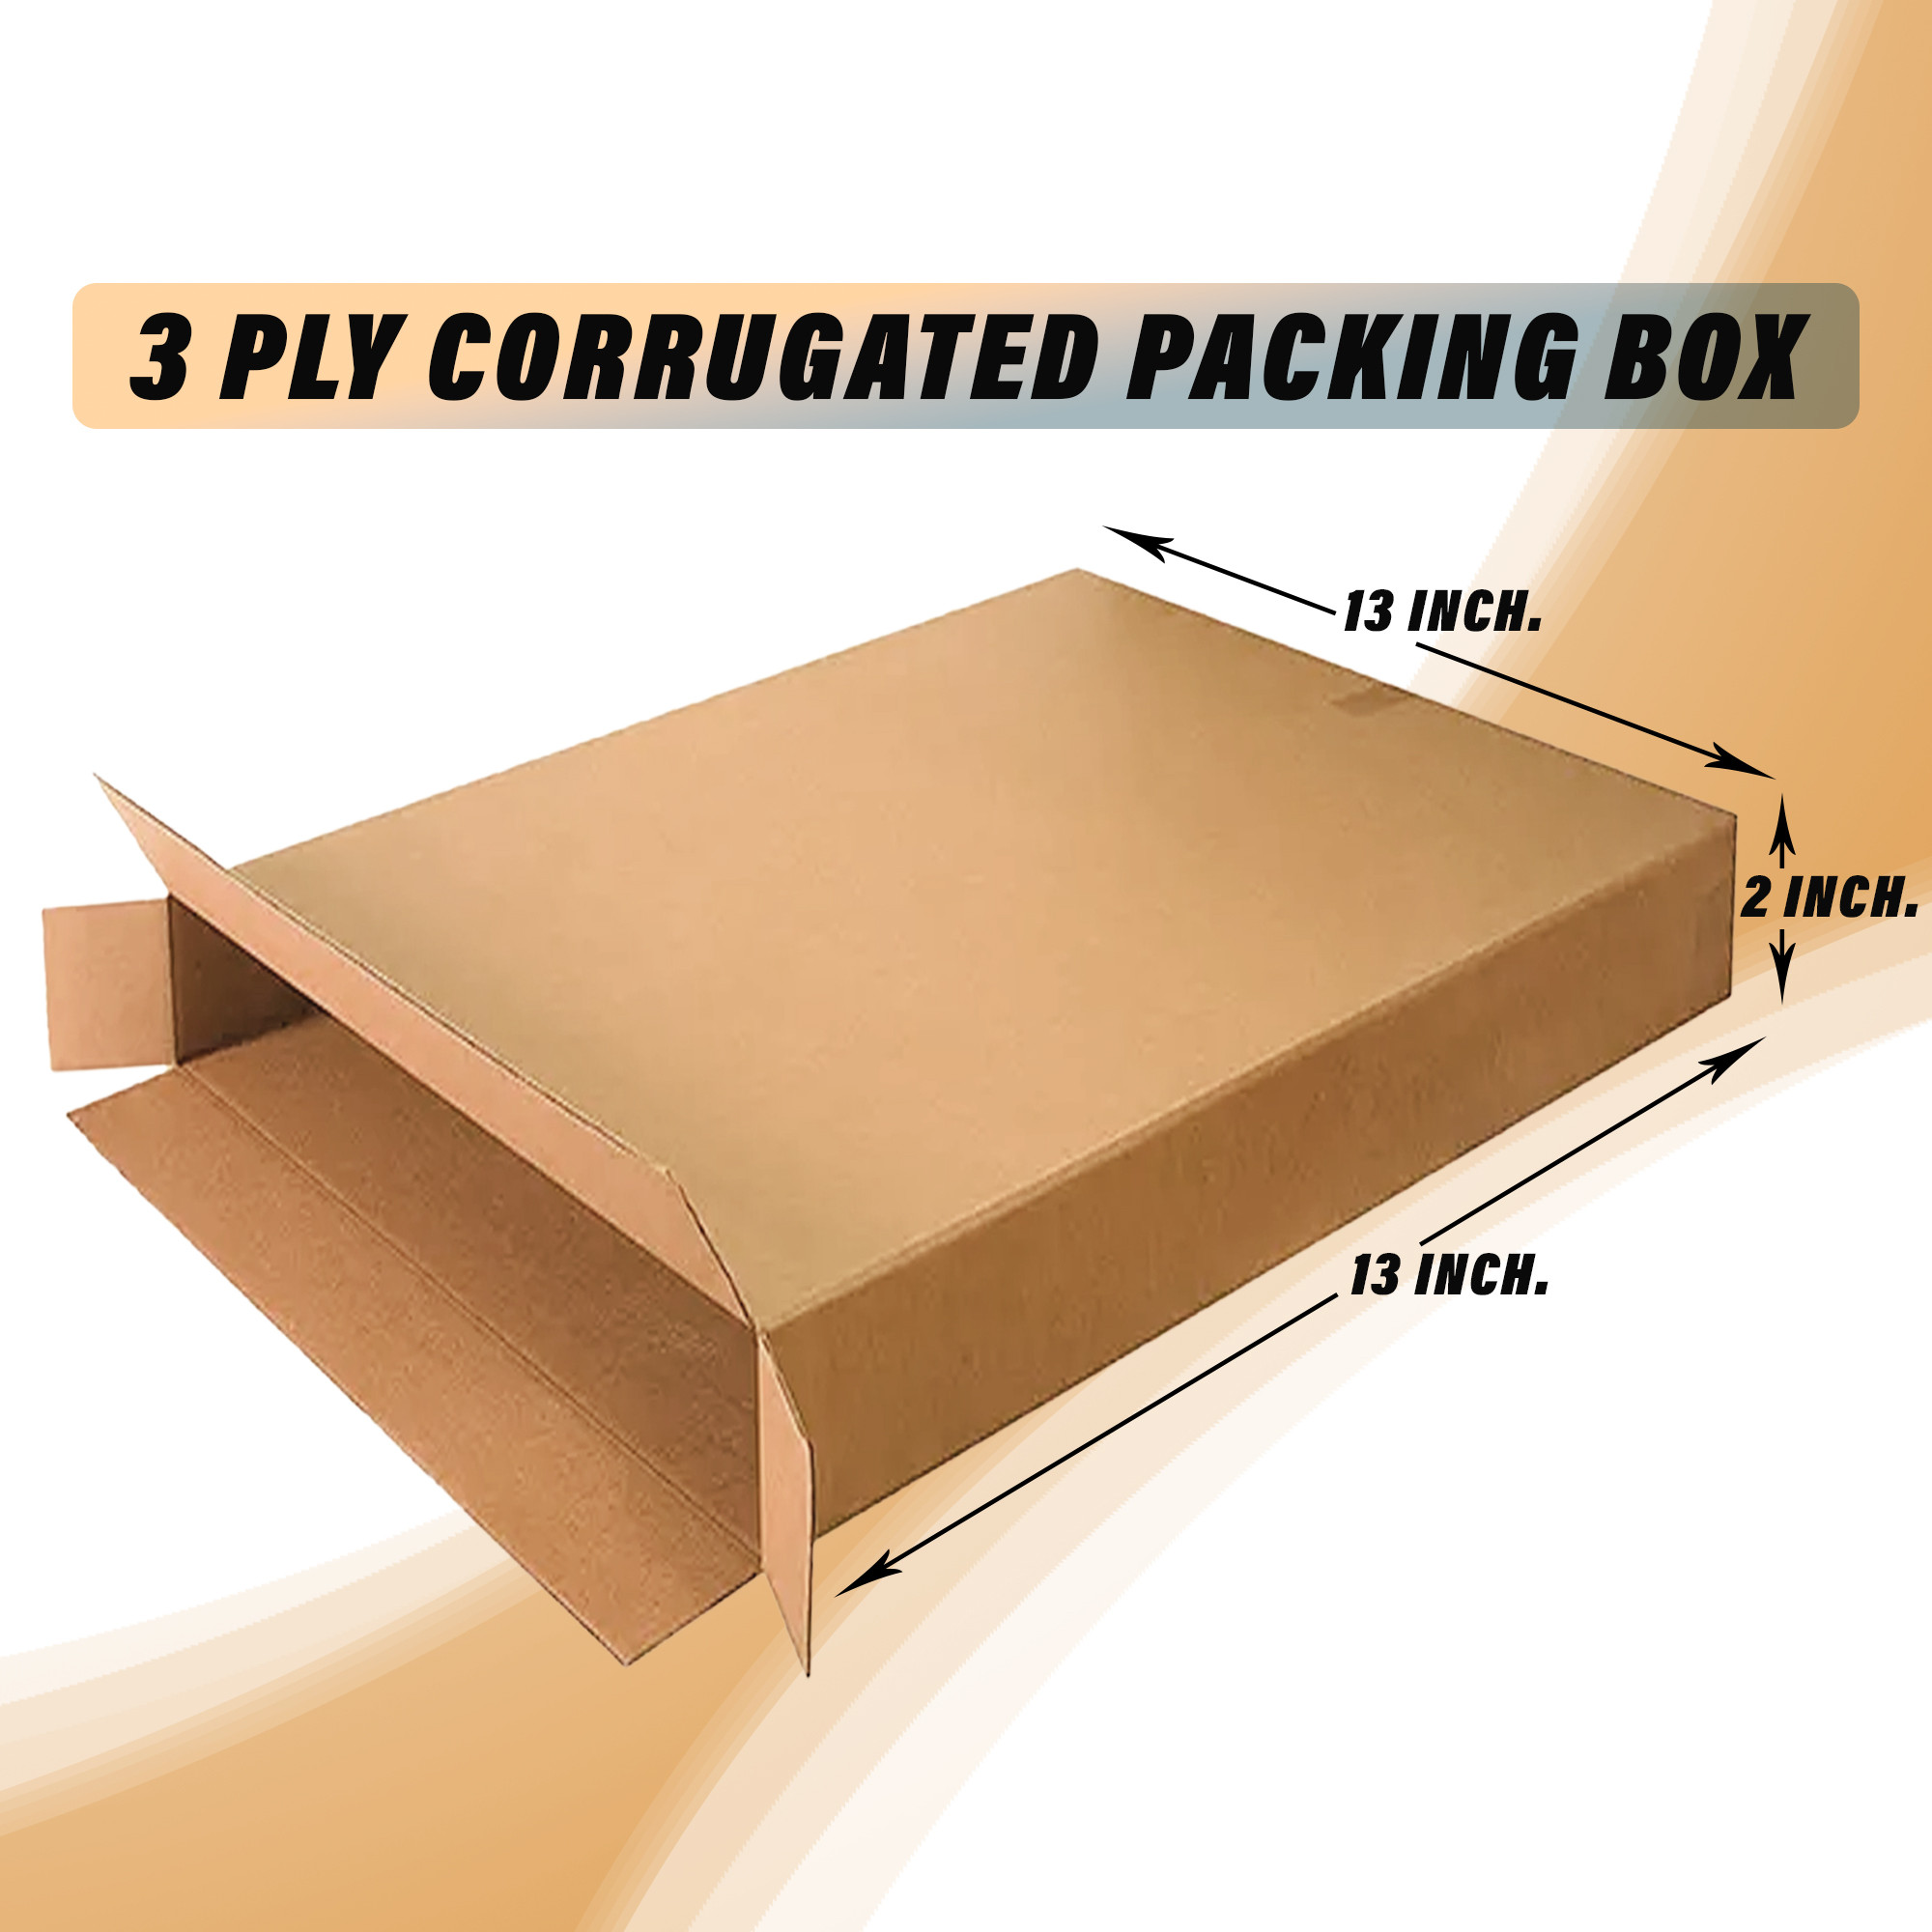 Kuber Industries Corrugated Box | 3 Ply Corrugated Packing Box | Corrugated for Shipping | Corrugated for Courier & Goods Transportation | L 13 x W 2 x H 13 Inch | Brown